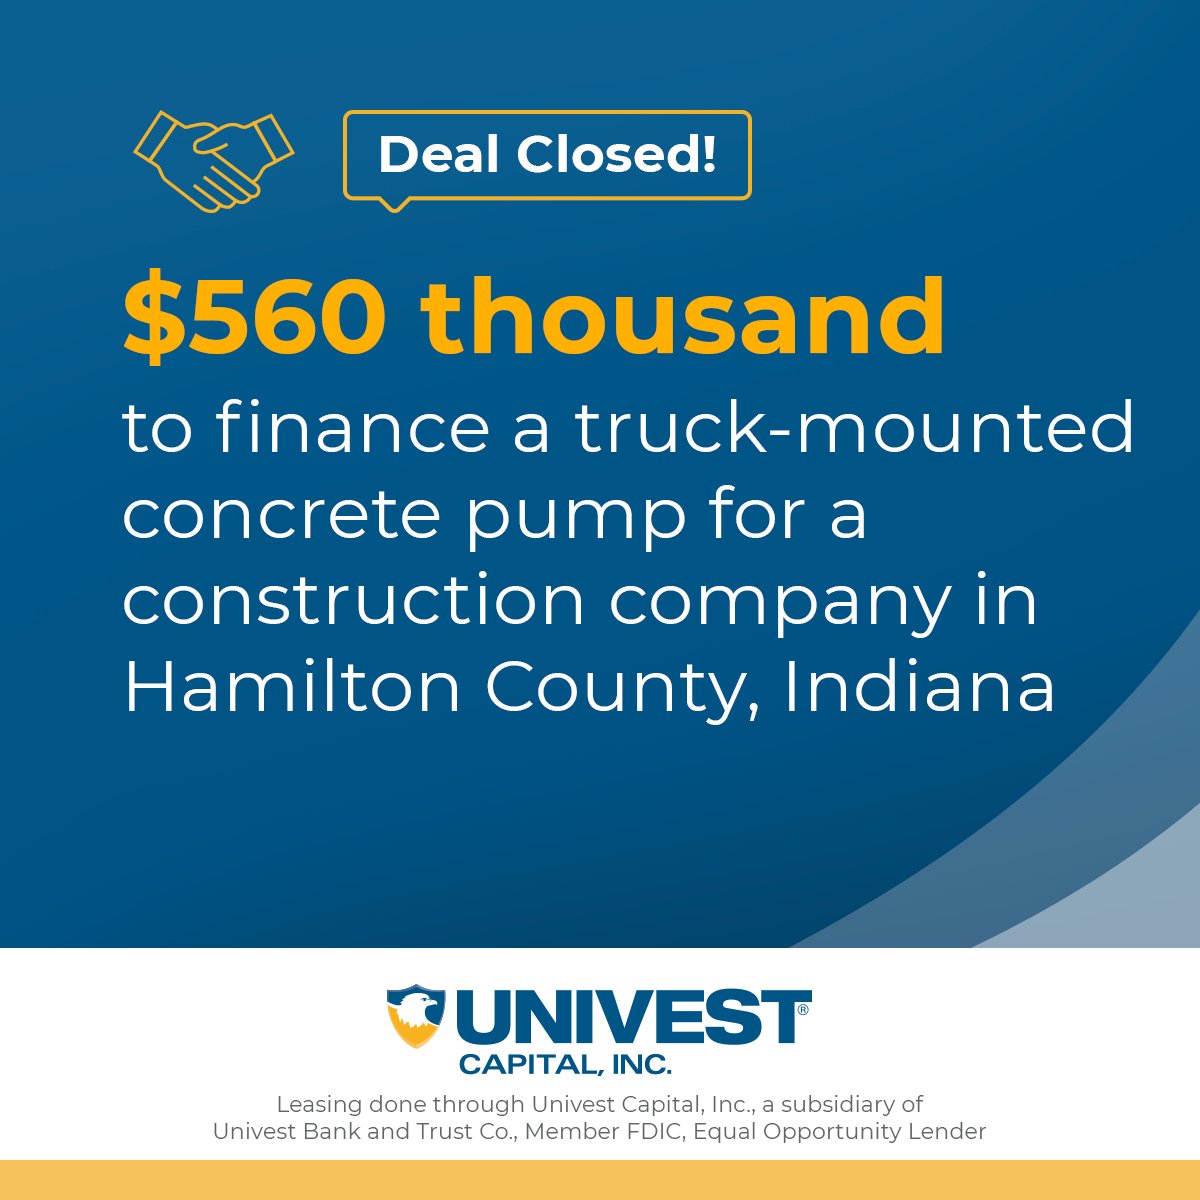 Through our equipment finance division, Univest Capital, we were happy to provide financing for a construction company in Indiana to purchase a truck-mounted concrete pump. Does your business need to purchase equipment? See what's possible with Univest: univest.net/equipment-fina…